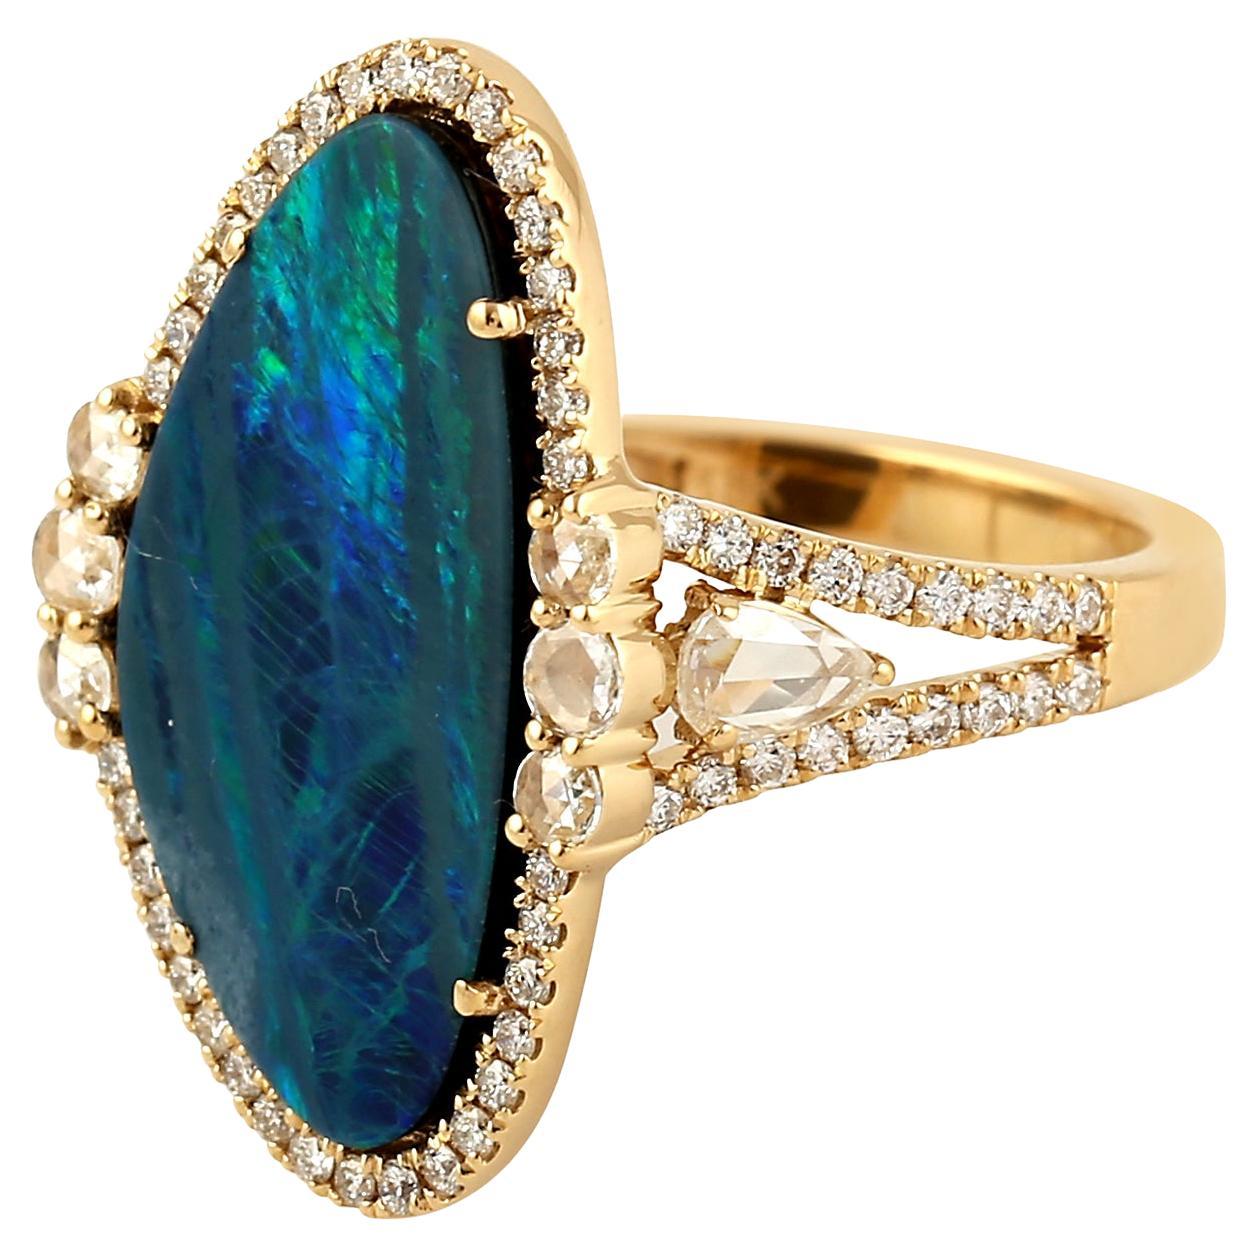 Opal & Diamond Ring With Rose Cut Diamond On Side Made in 18k Yellow Gold